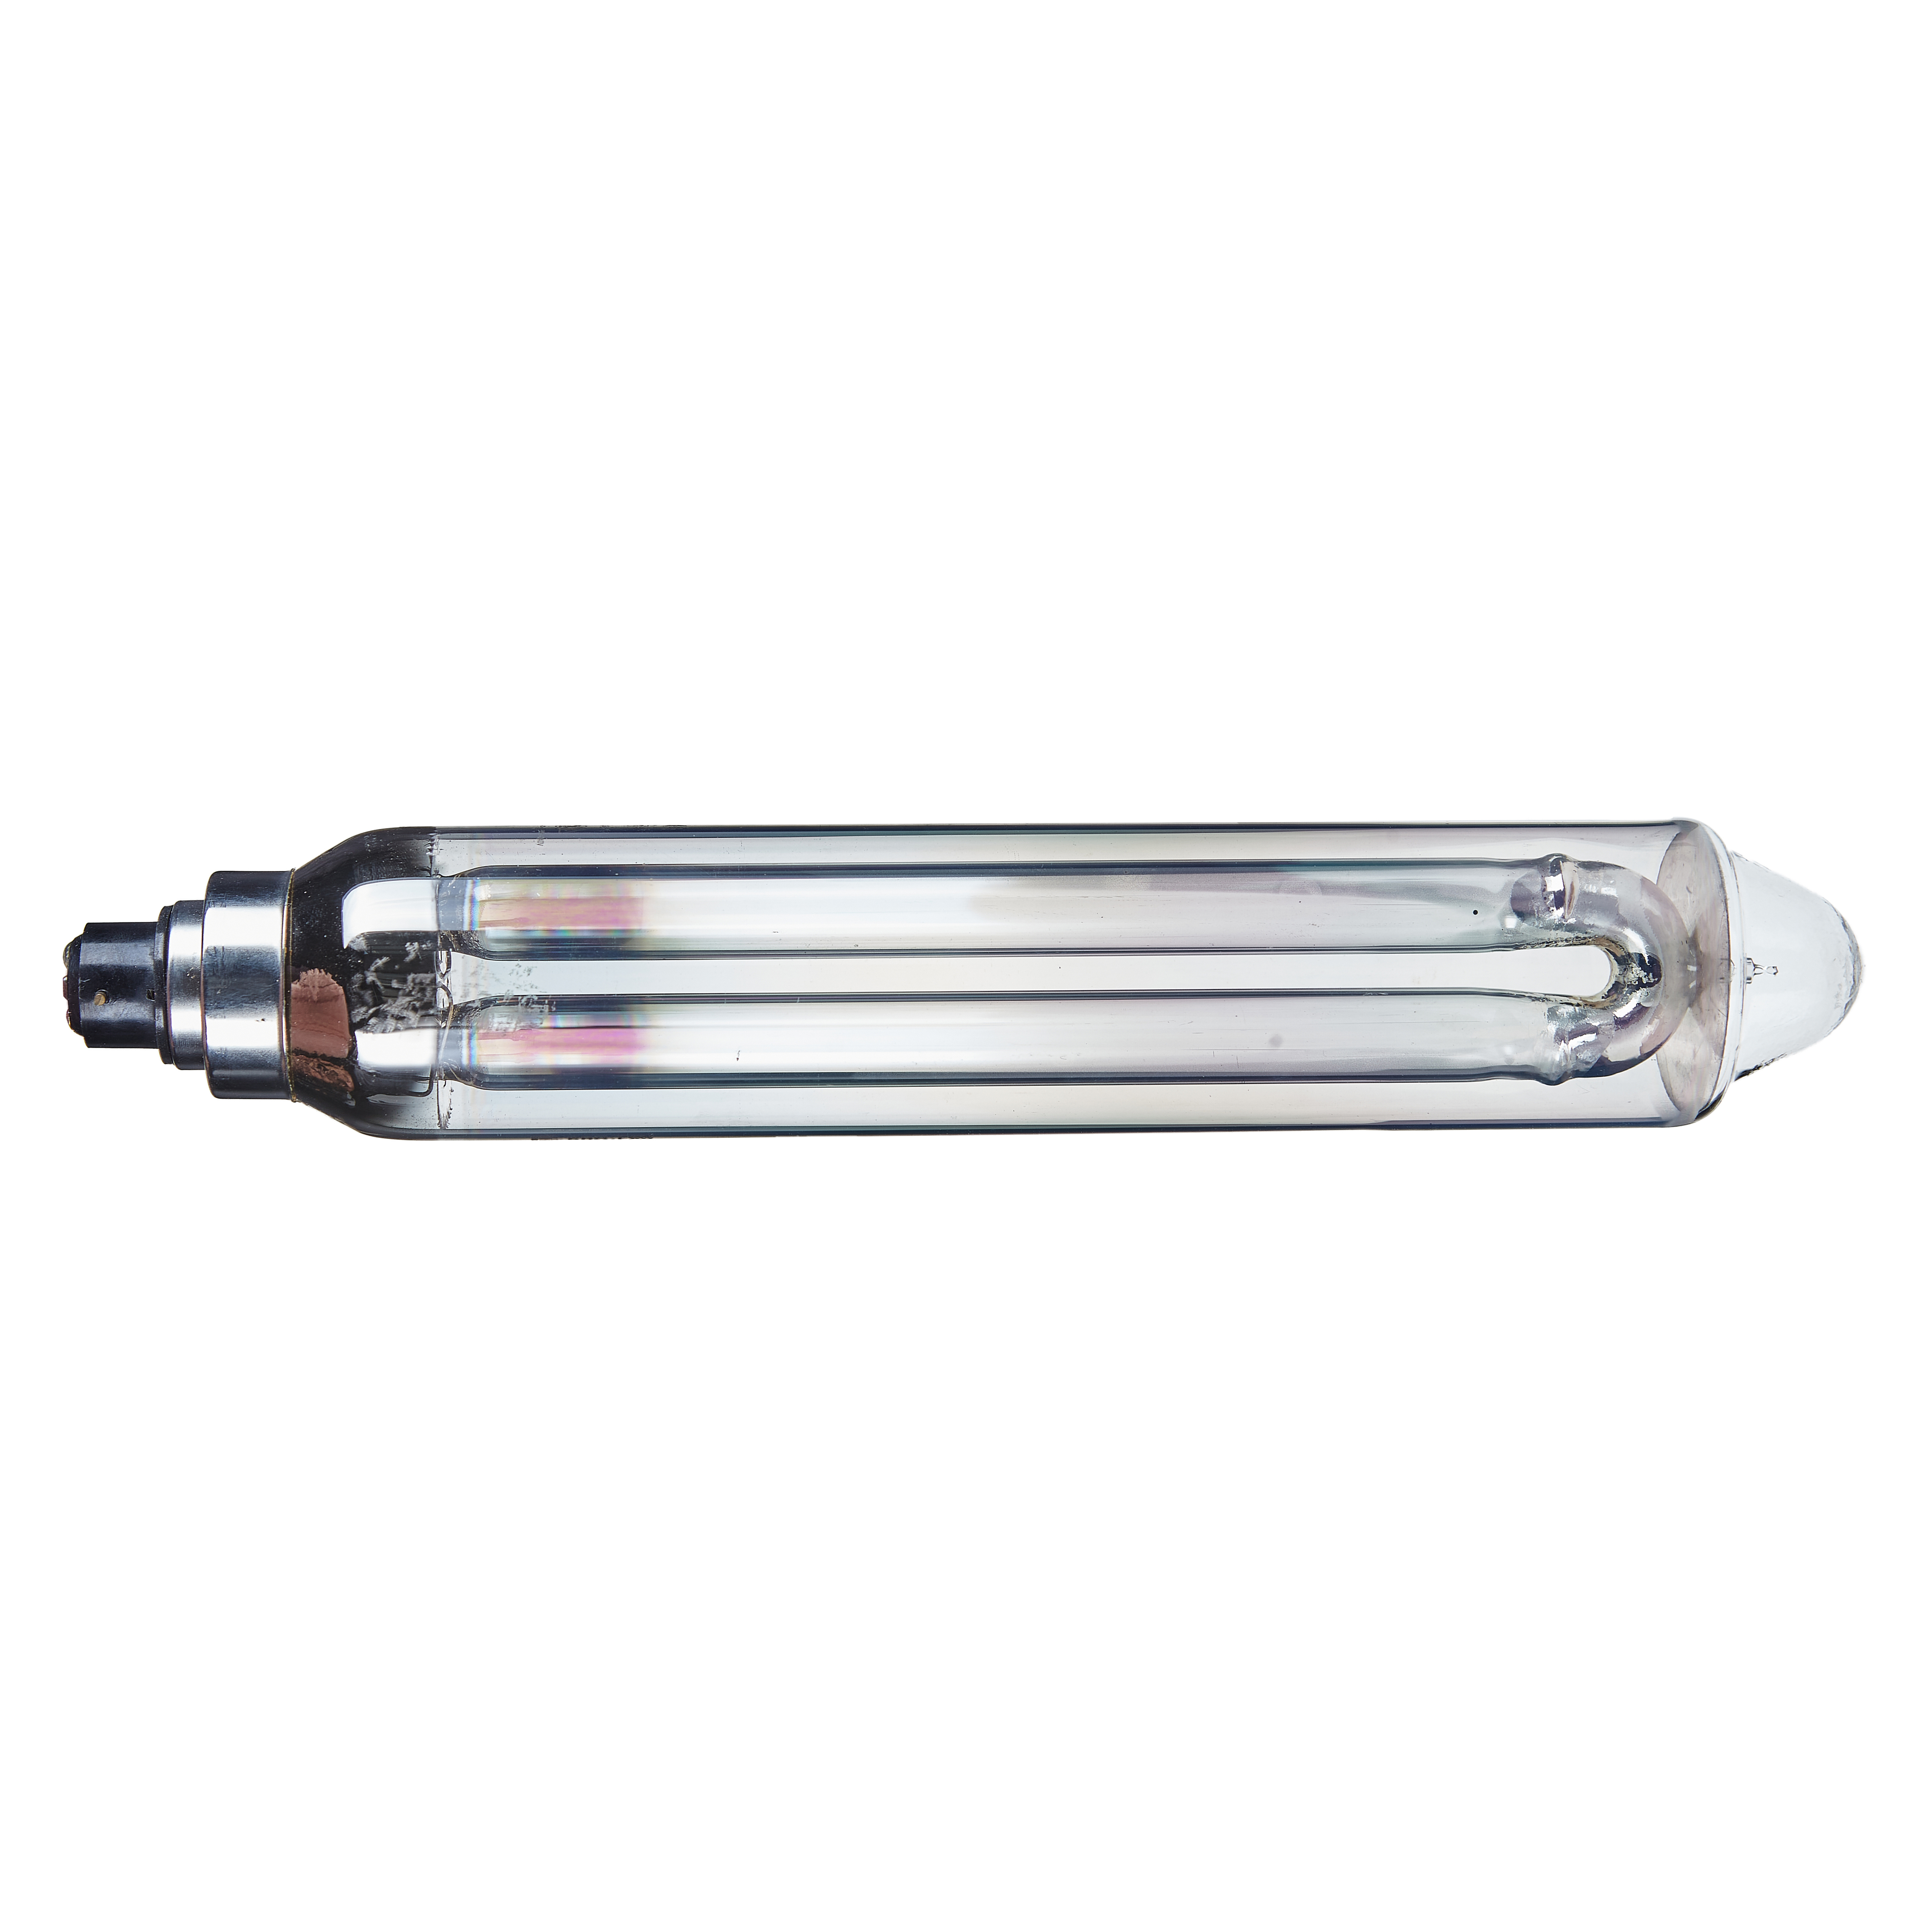 Low Pressure Sodium Lamp Sox-e 26w By22d Road Light